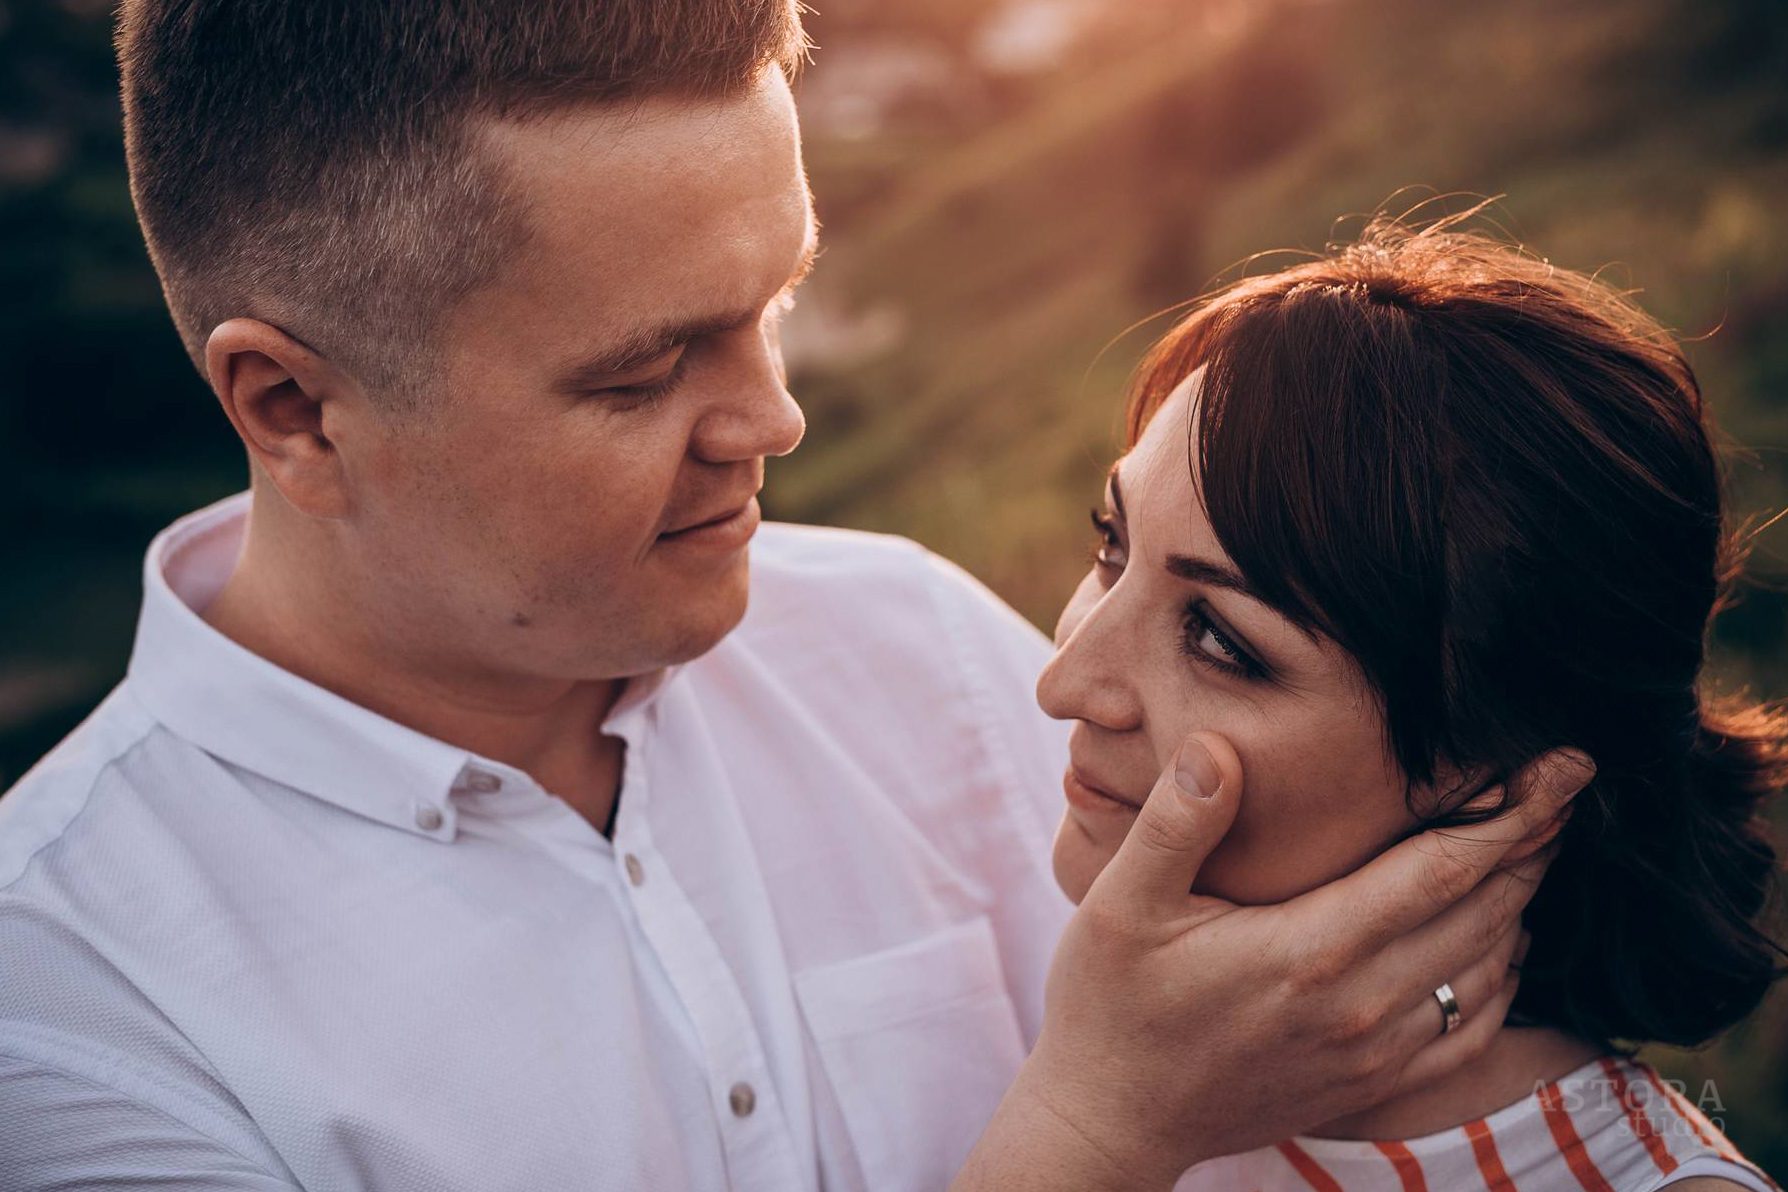 Engagement Photoshoot Ideas For Max And Julia-16